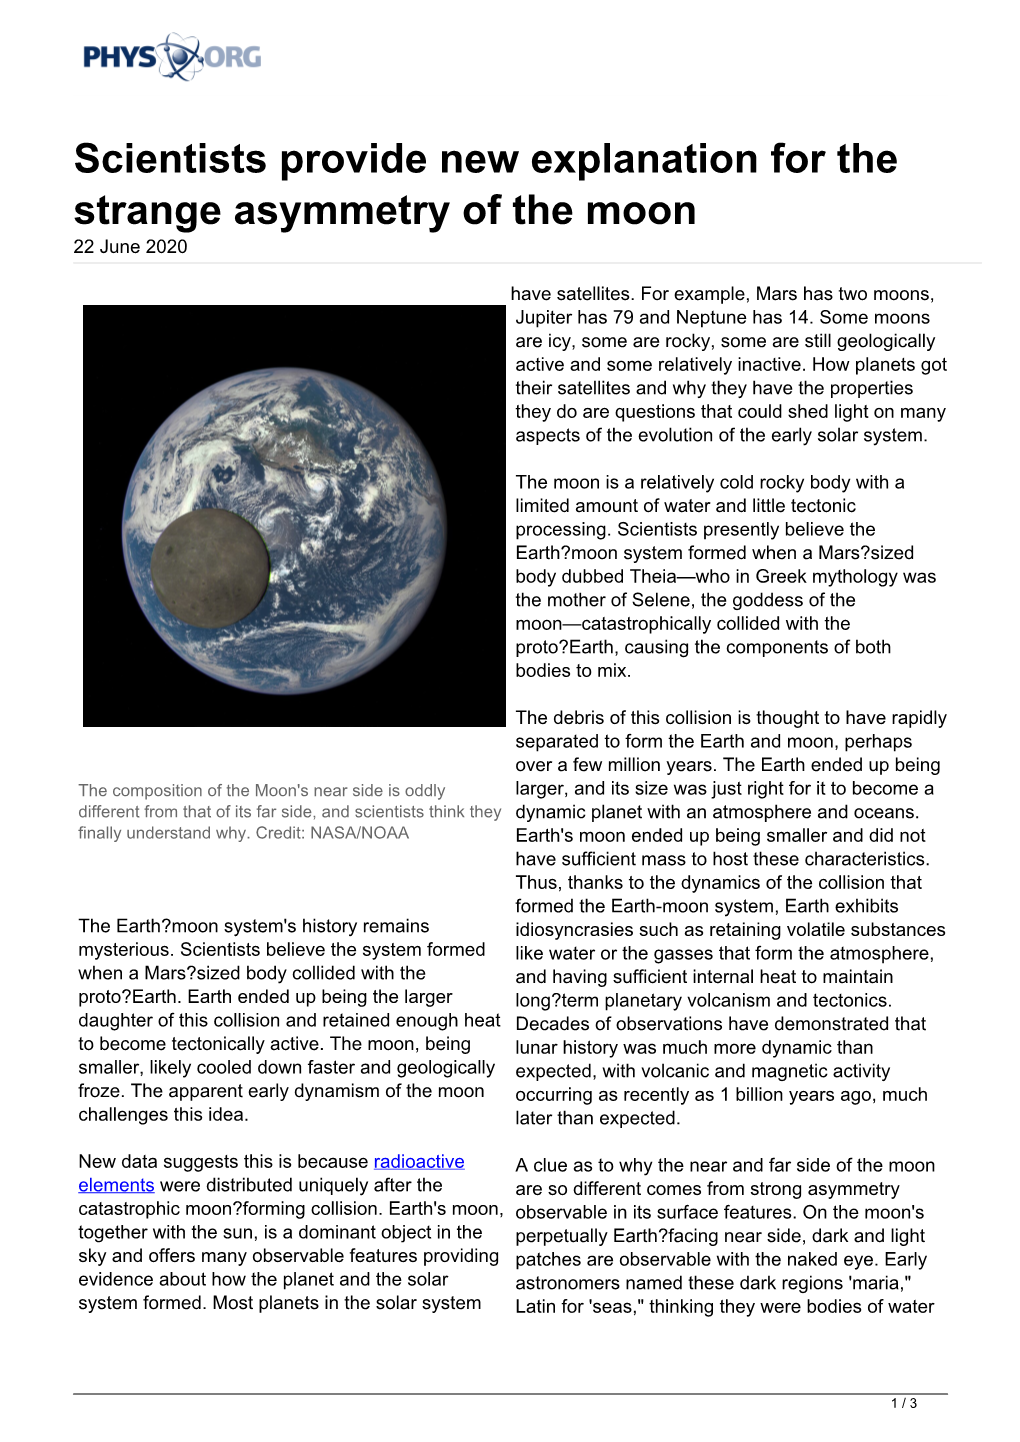 Scientists Provide New Explanation for the Strange Asymmetry of the Moon 22 June 2020